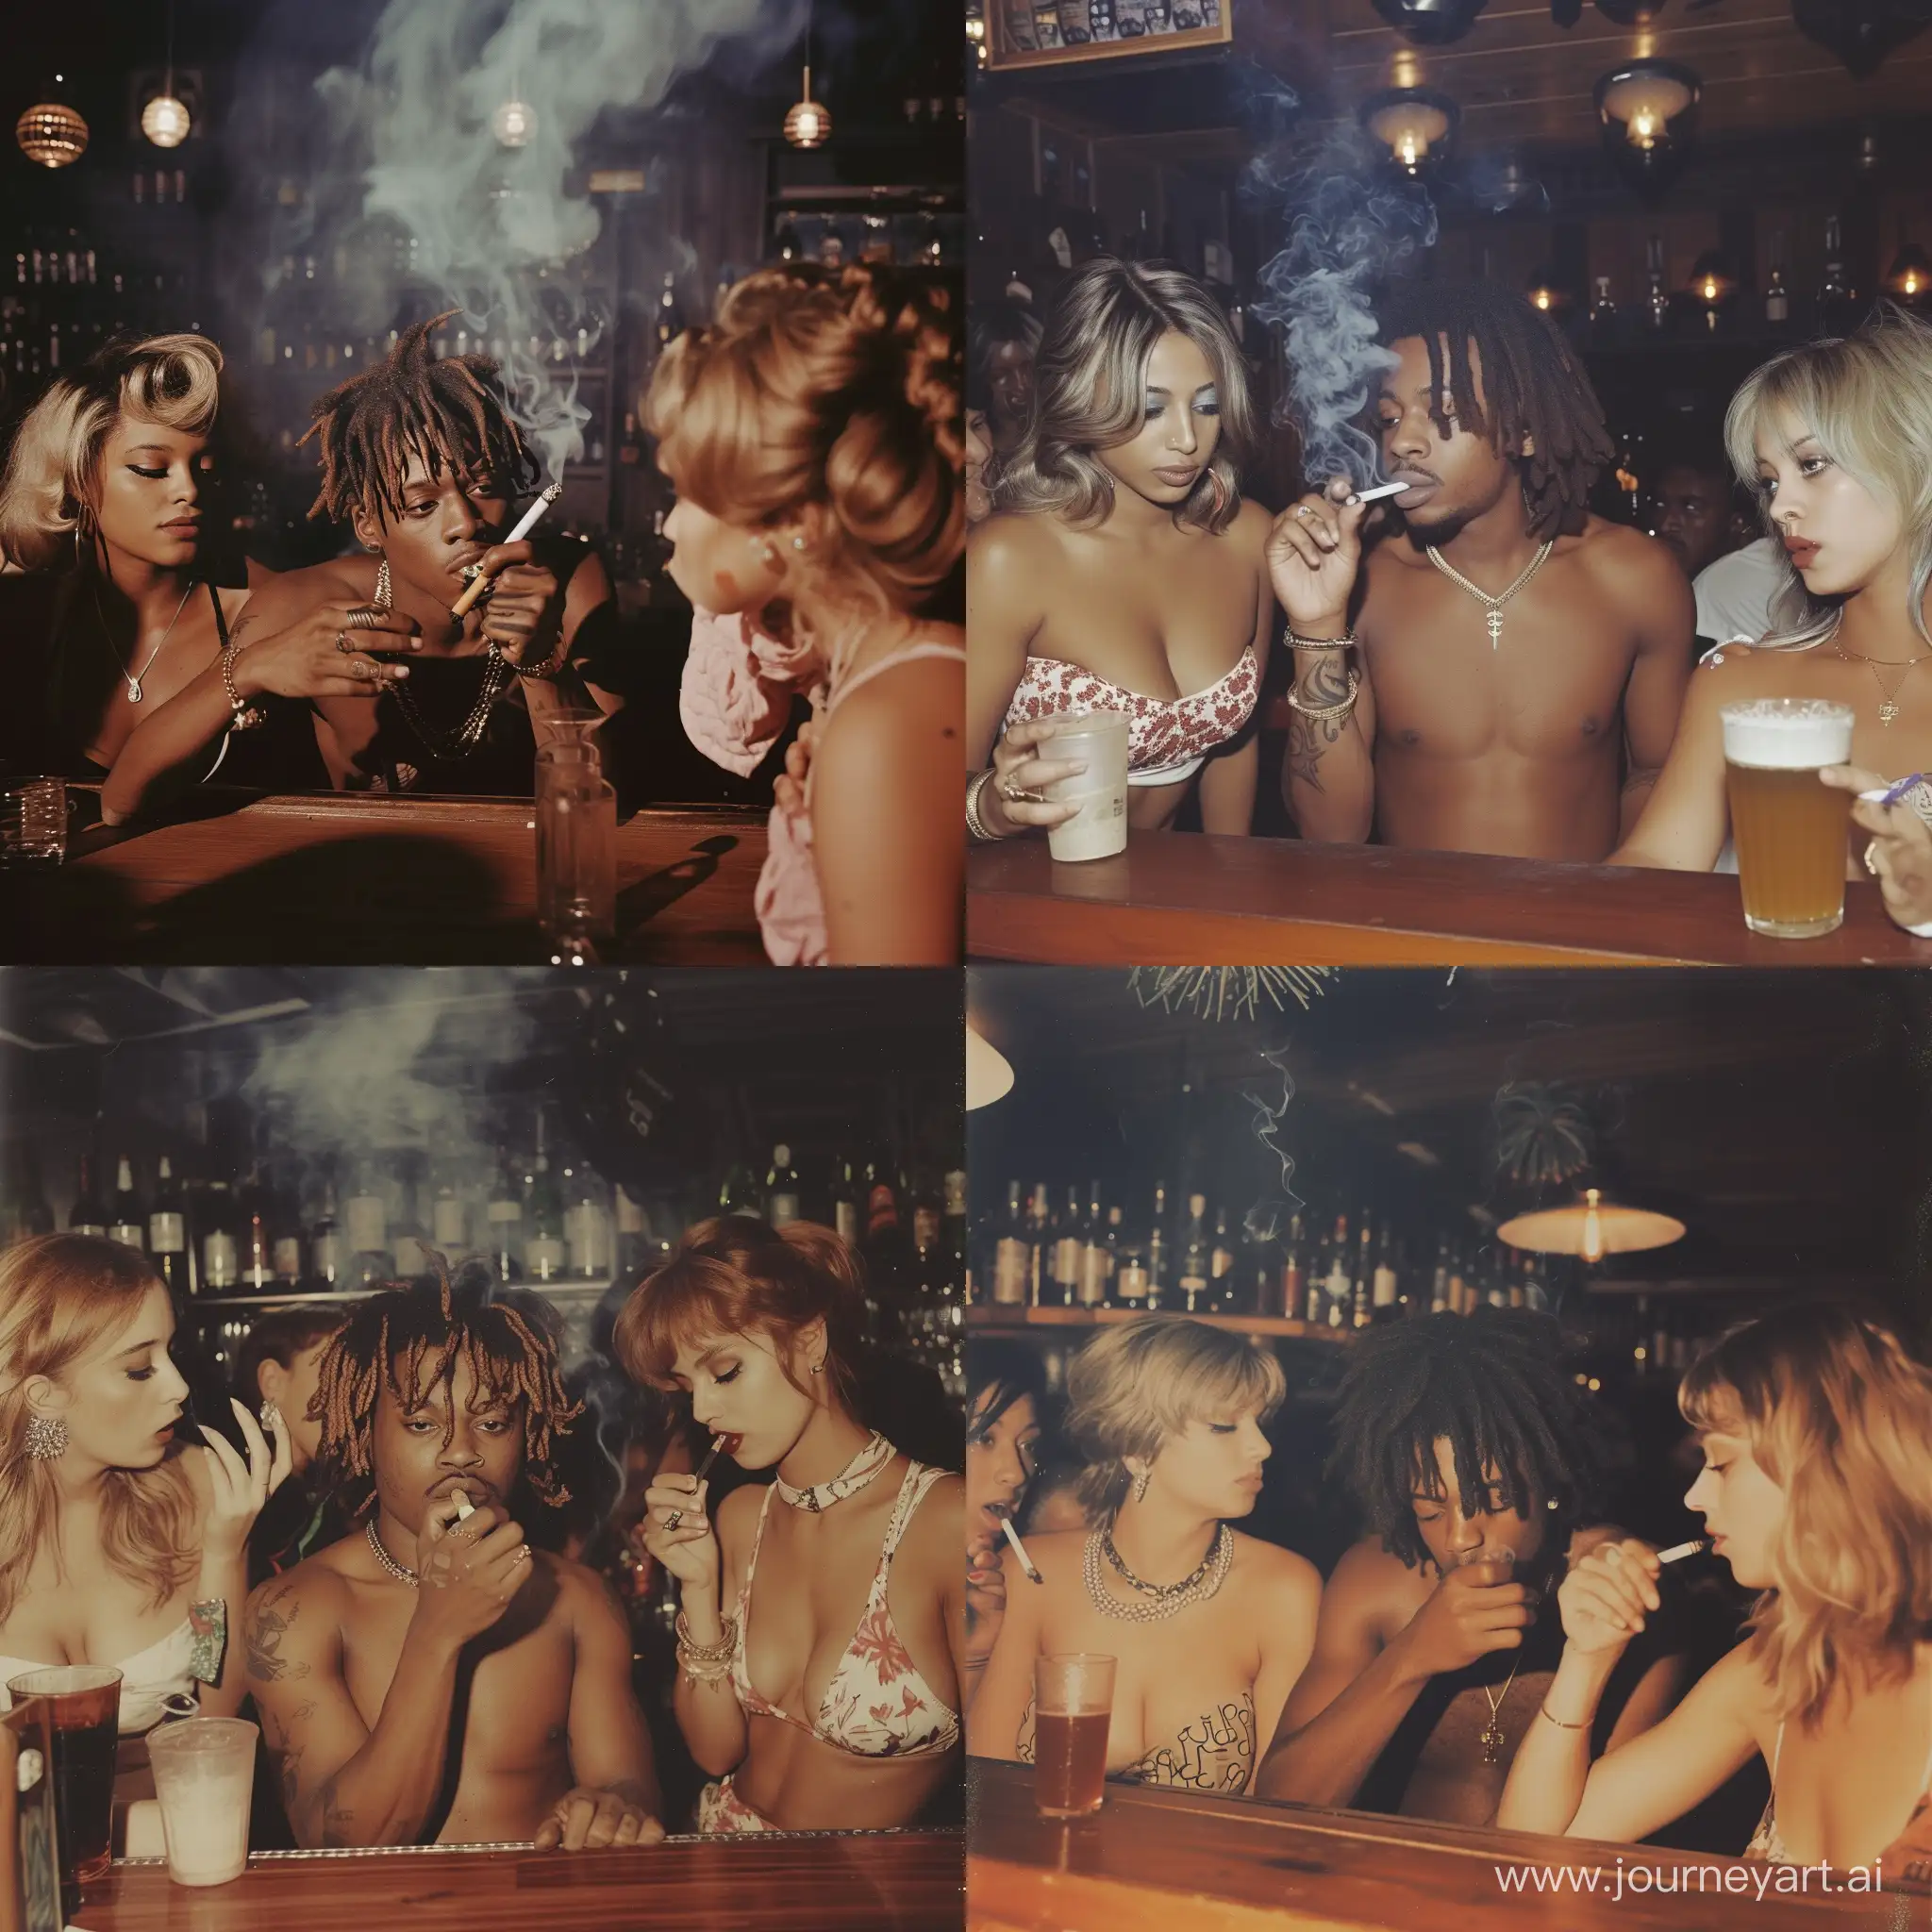 A 1960s Photograph of Juice WRLD Smoking with Women in a Bar.